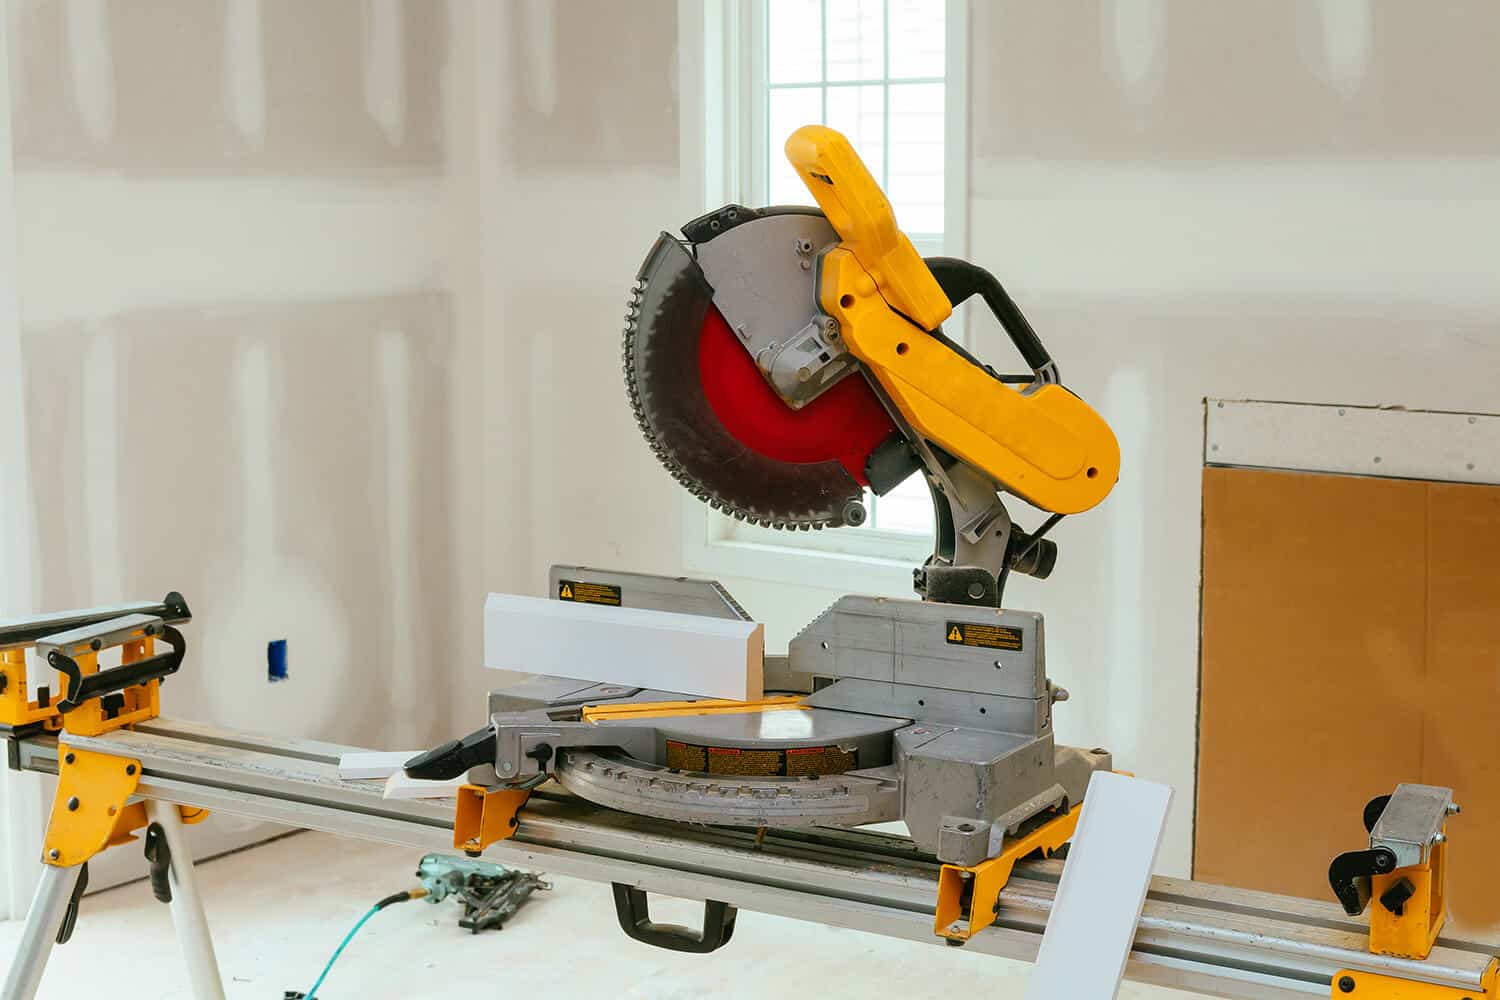 How To Use A Miter Saw To Cut Baseboards